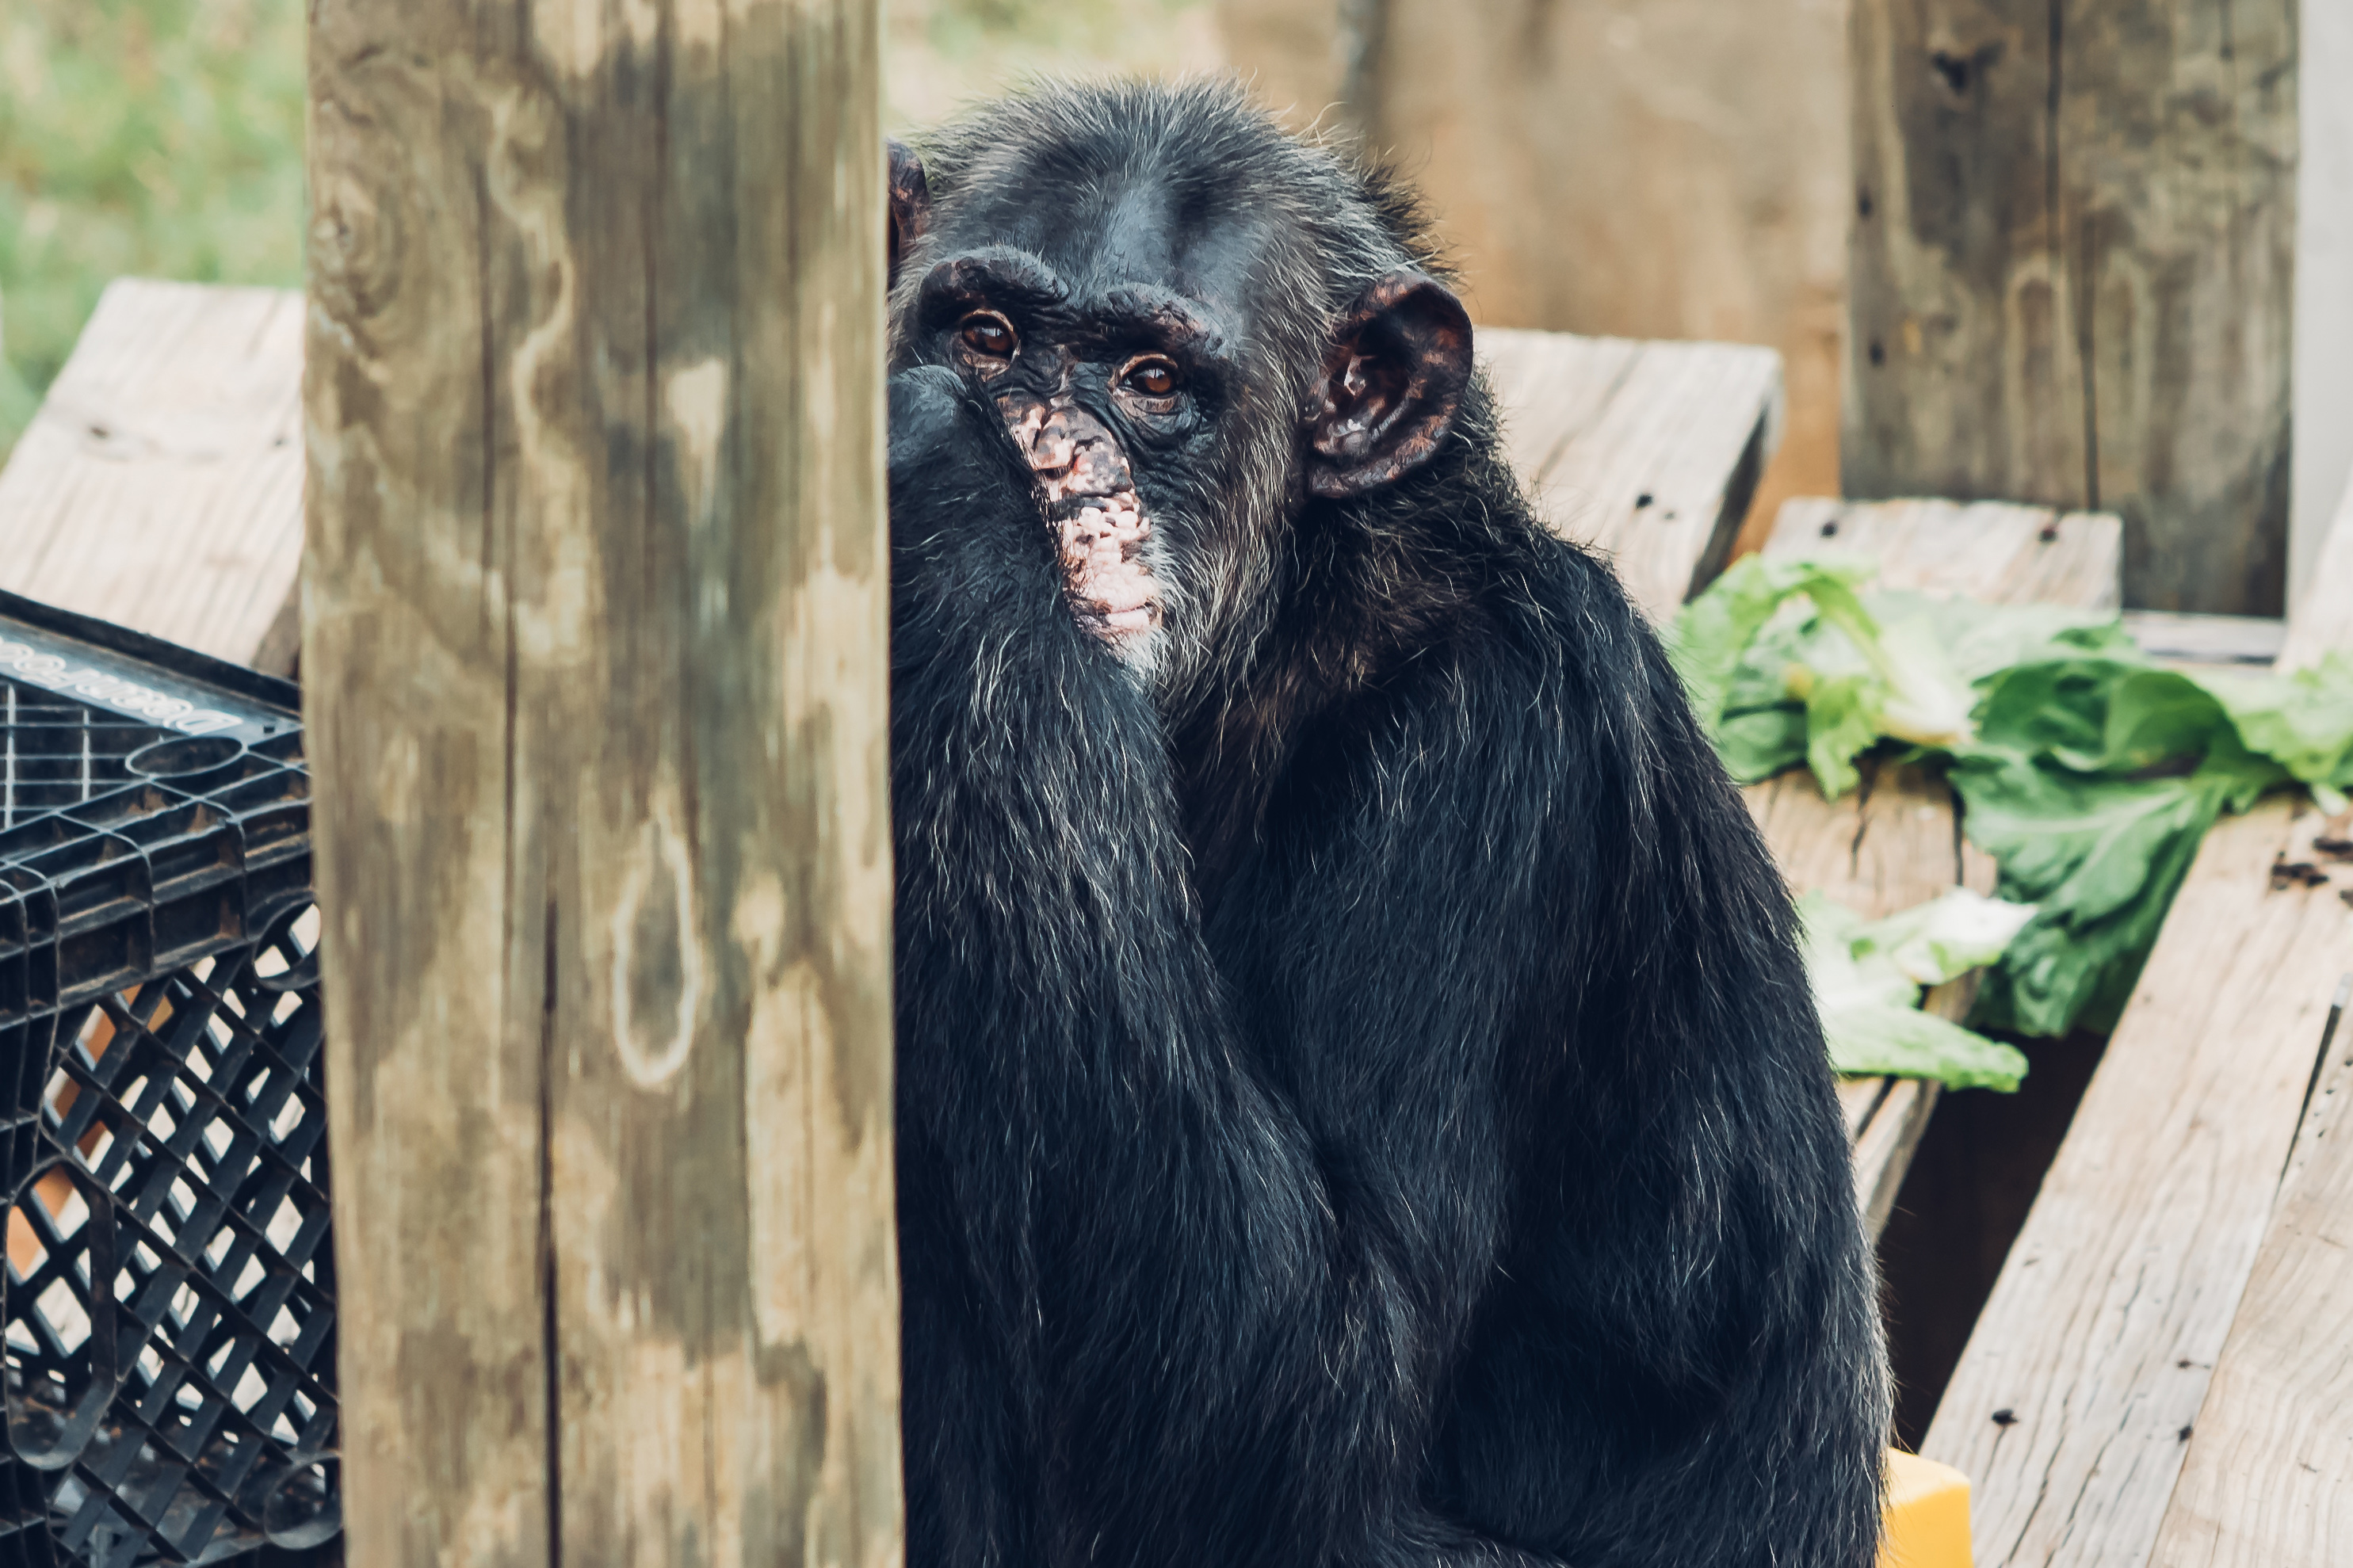 Charity, an NIH-owned chimpanzee at Chimp Haven, enjoys a quiet moment.  